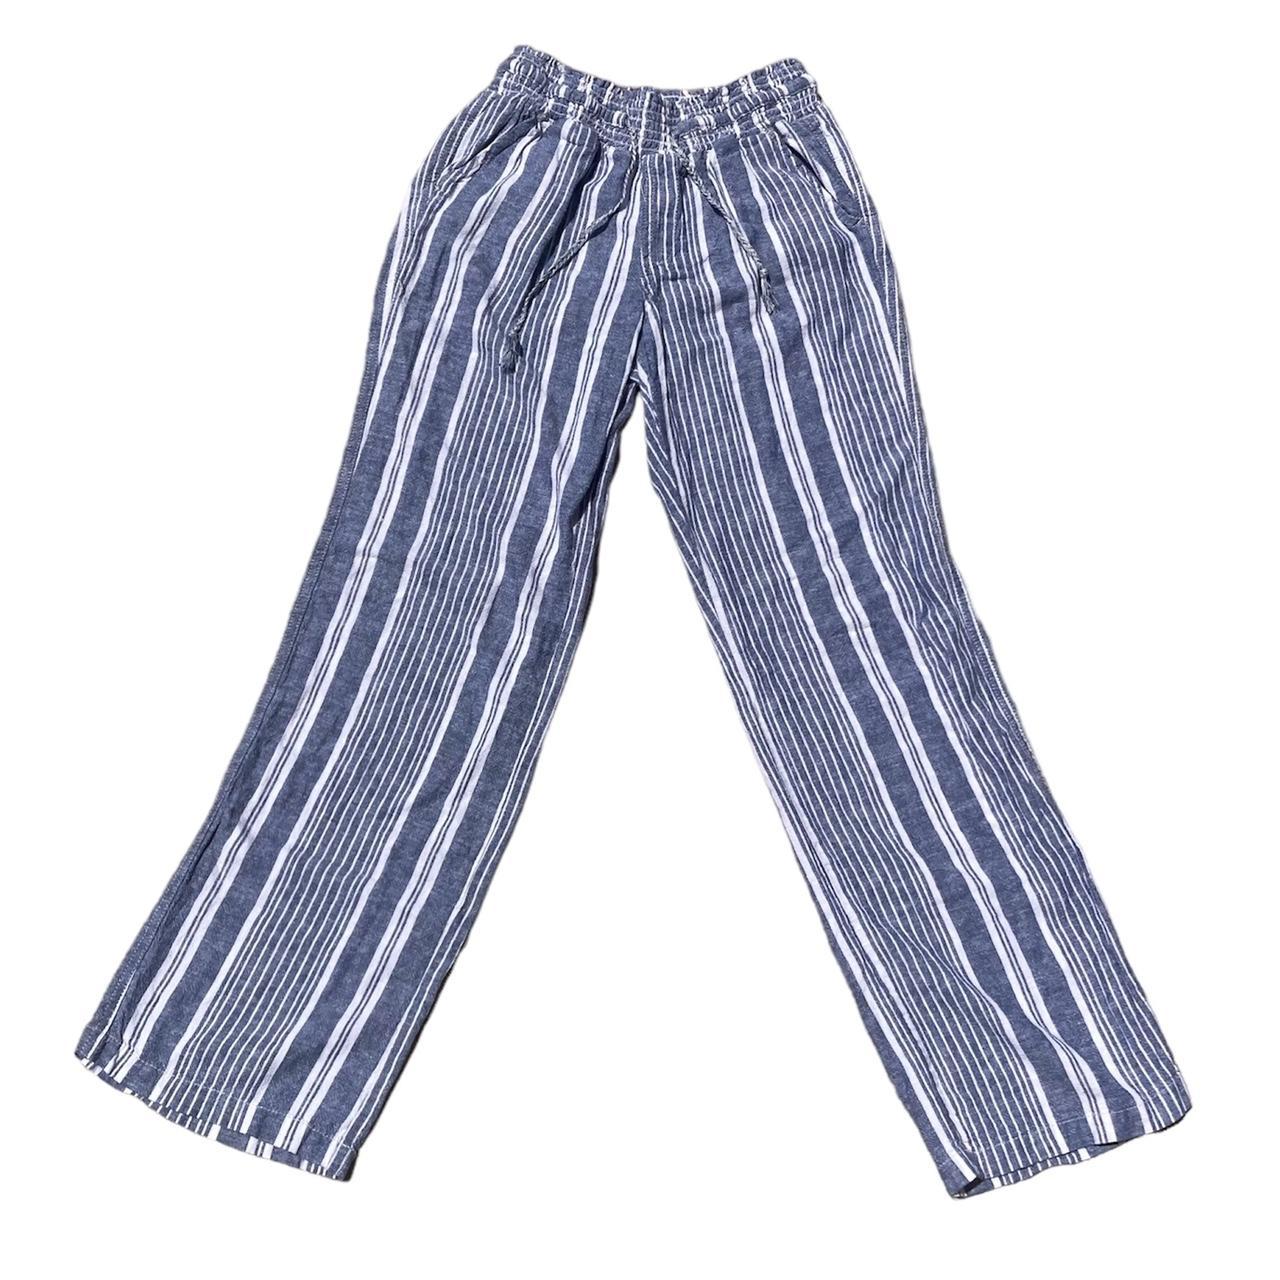 American Heritage Textiles Women's Blue and White Trousers (2)